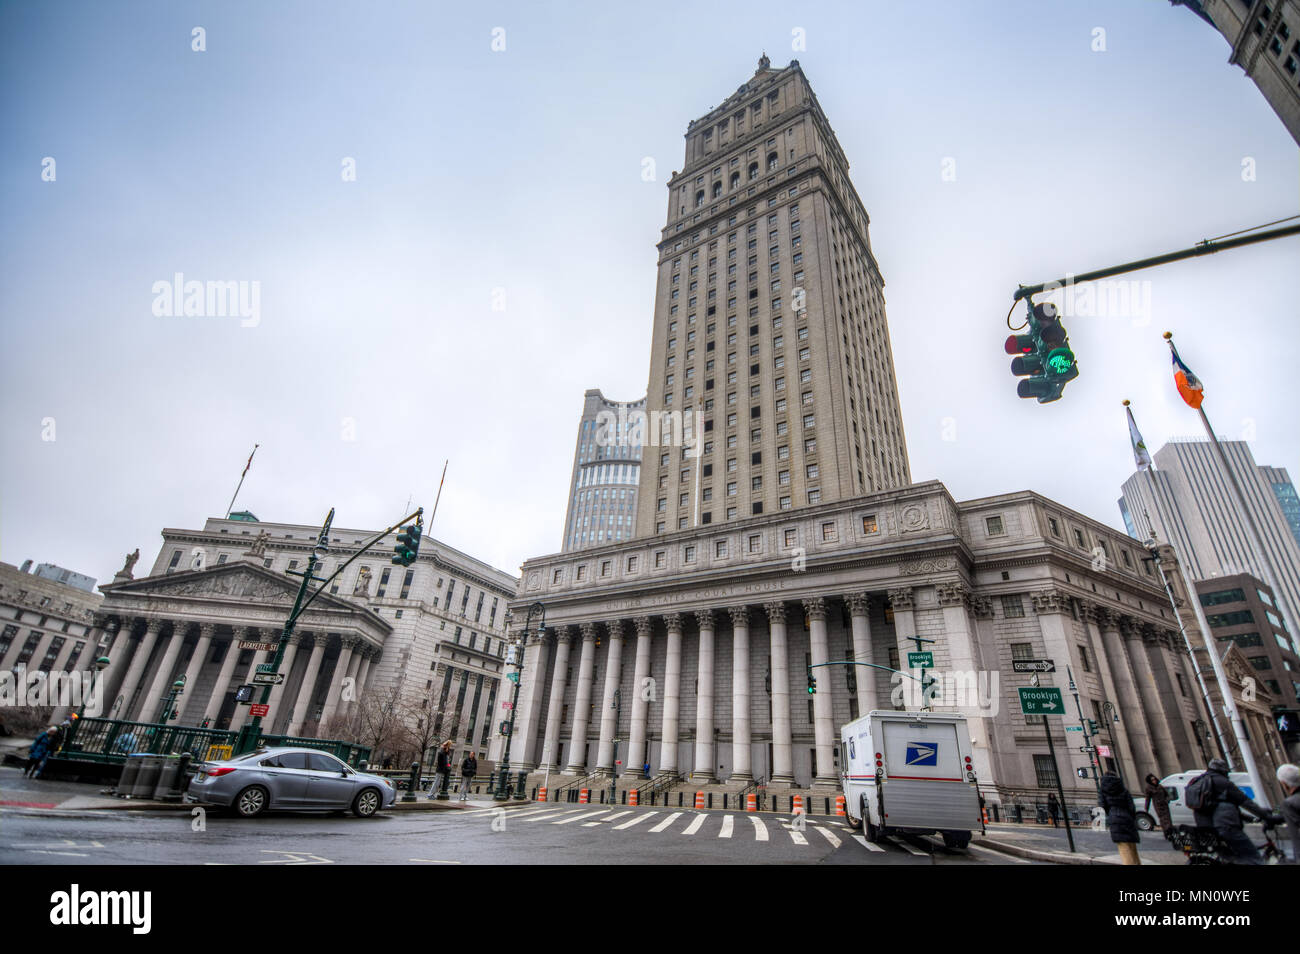 New York, US - March 29, 2018: The united states court house in central Manhattan on a foggy day Stock Photo